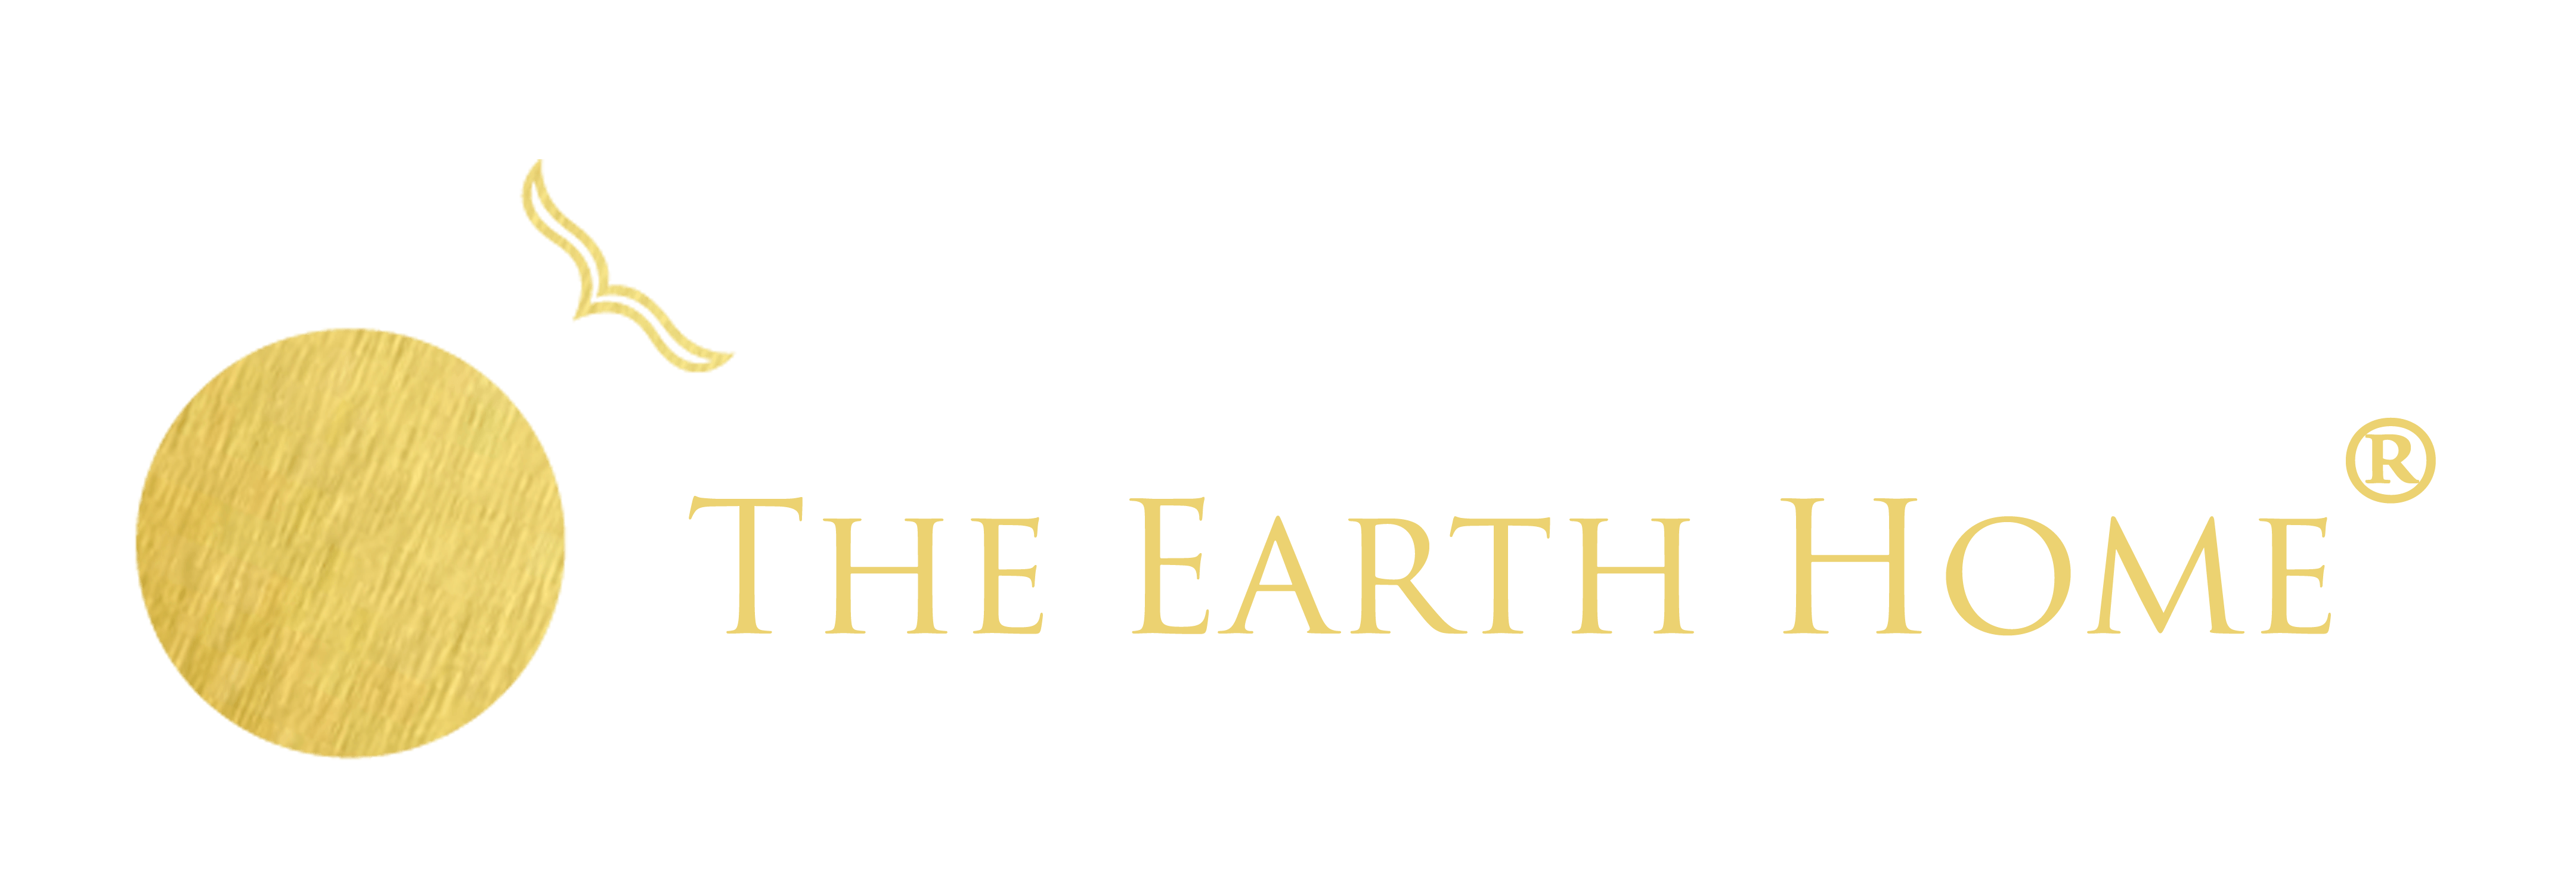 The Earth Home